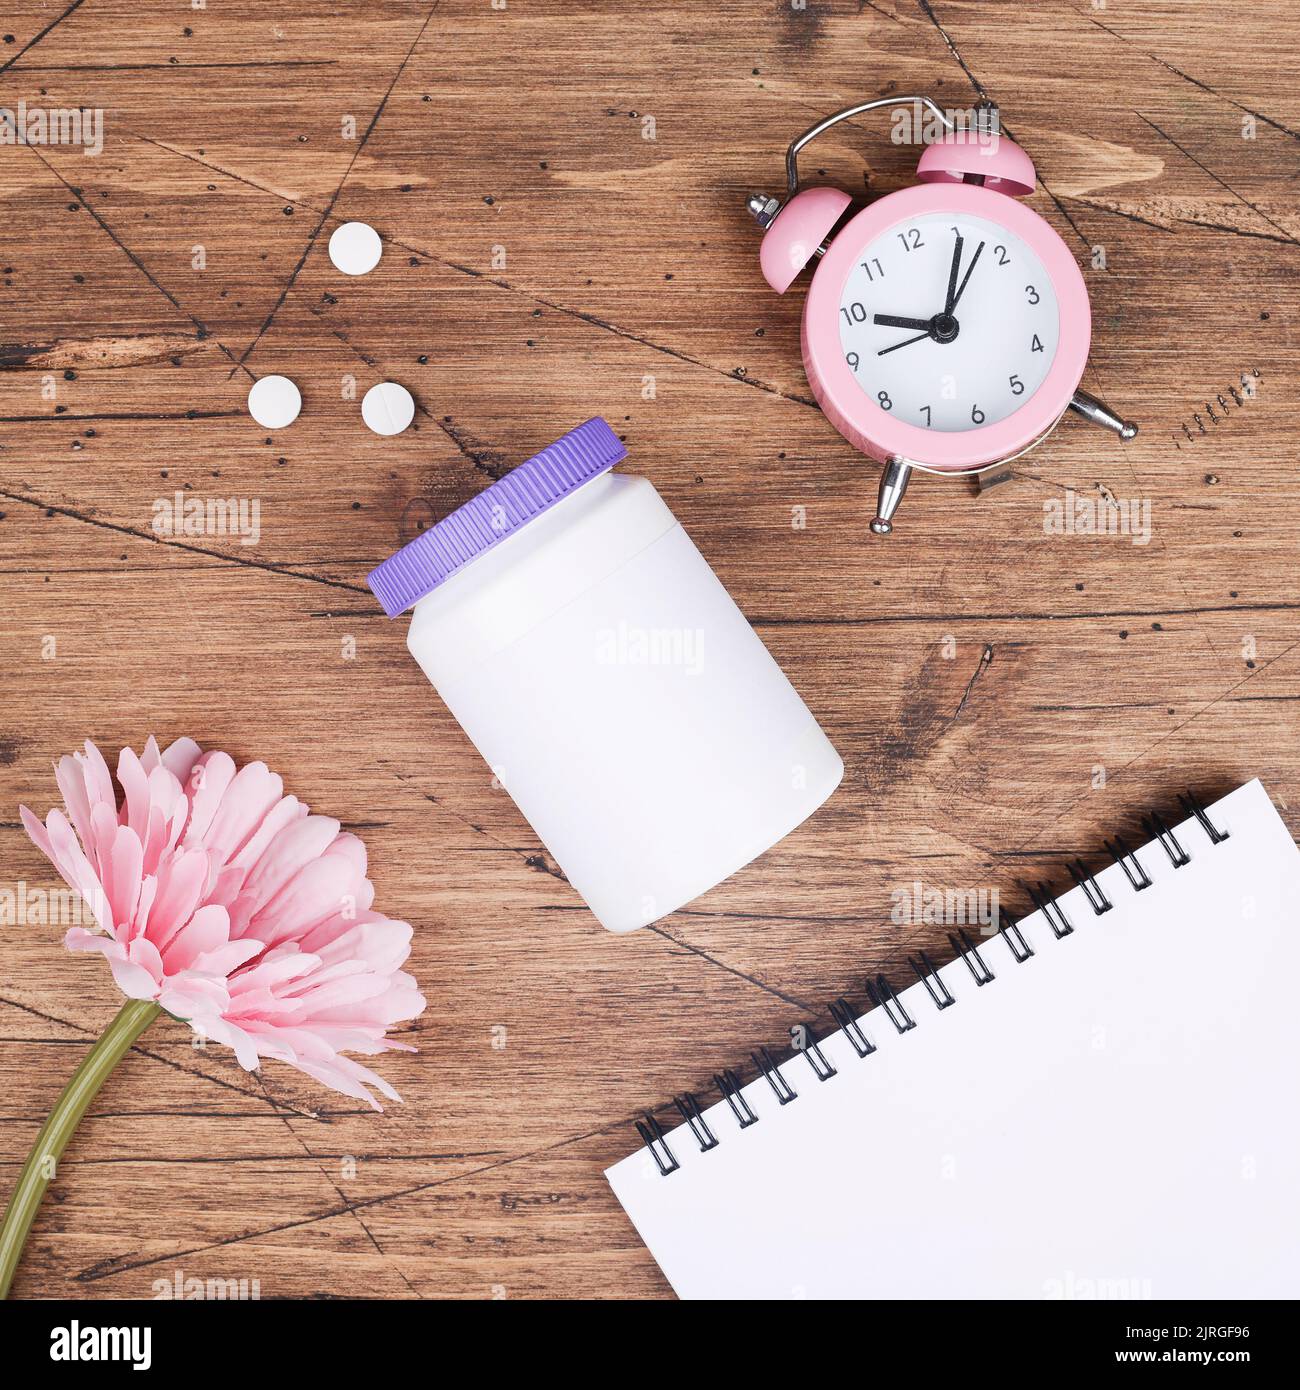 women health concept. medicine, health care style. copy space. white plastic bottle with pills, flowers, notebook and clock on wood background. square Stock Photo